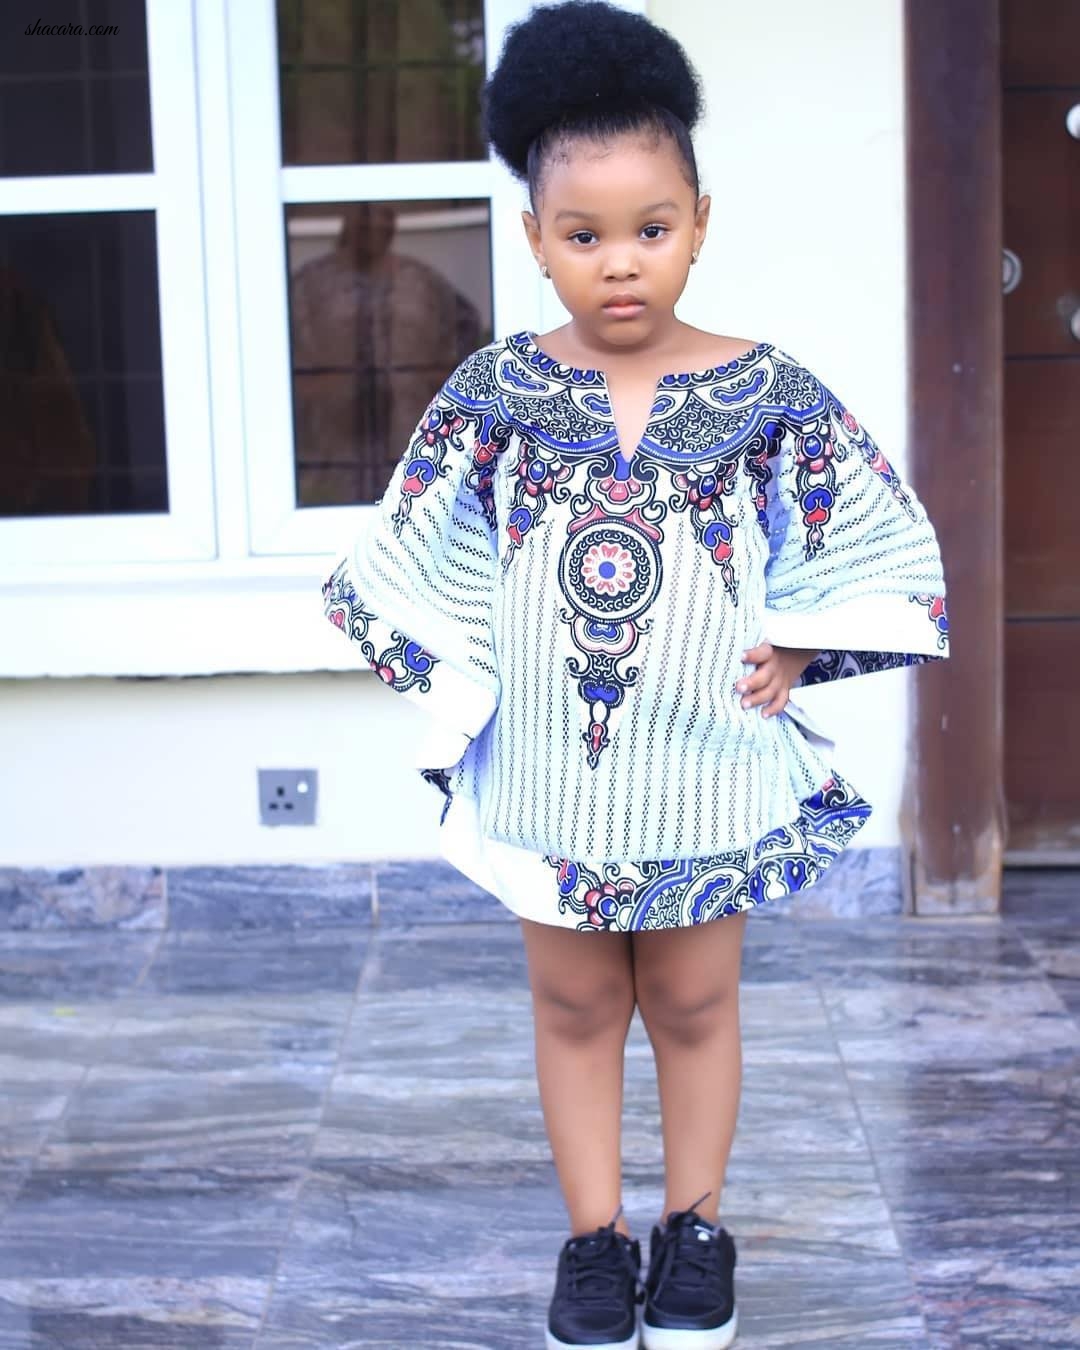 Fashion Kids Will Not Be Left This Chilly Rainy Season, Check Out These Fabulous Looks By @TeddyTeddyBaby